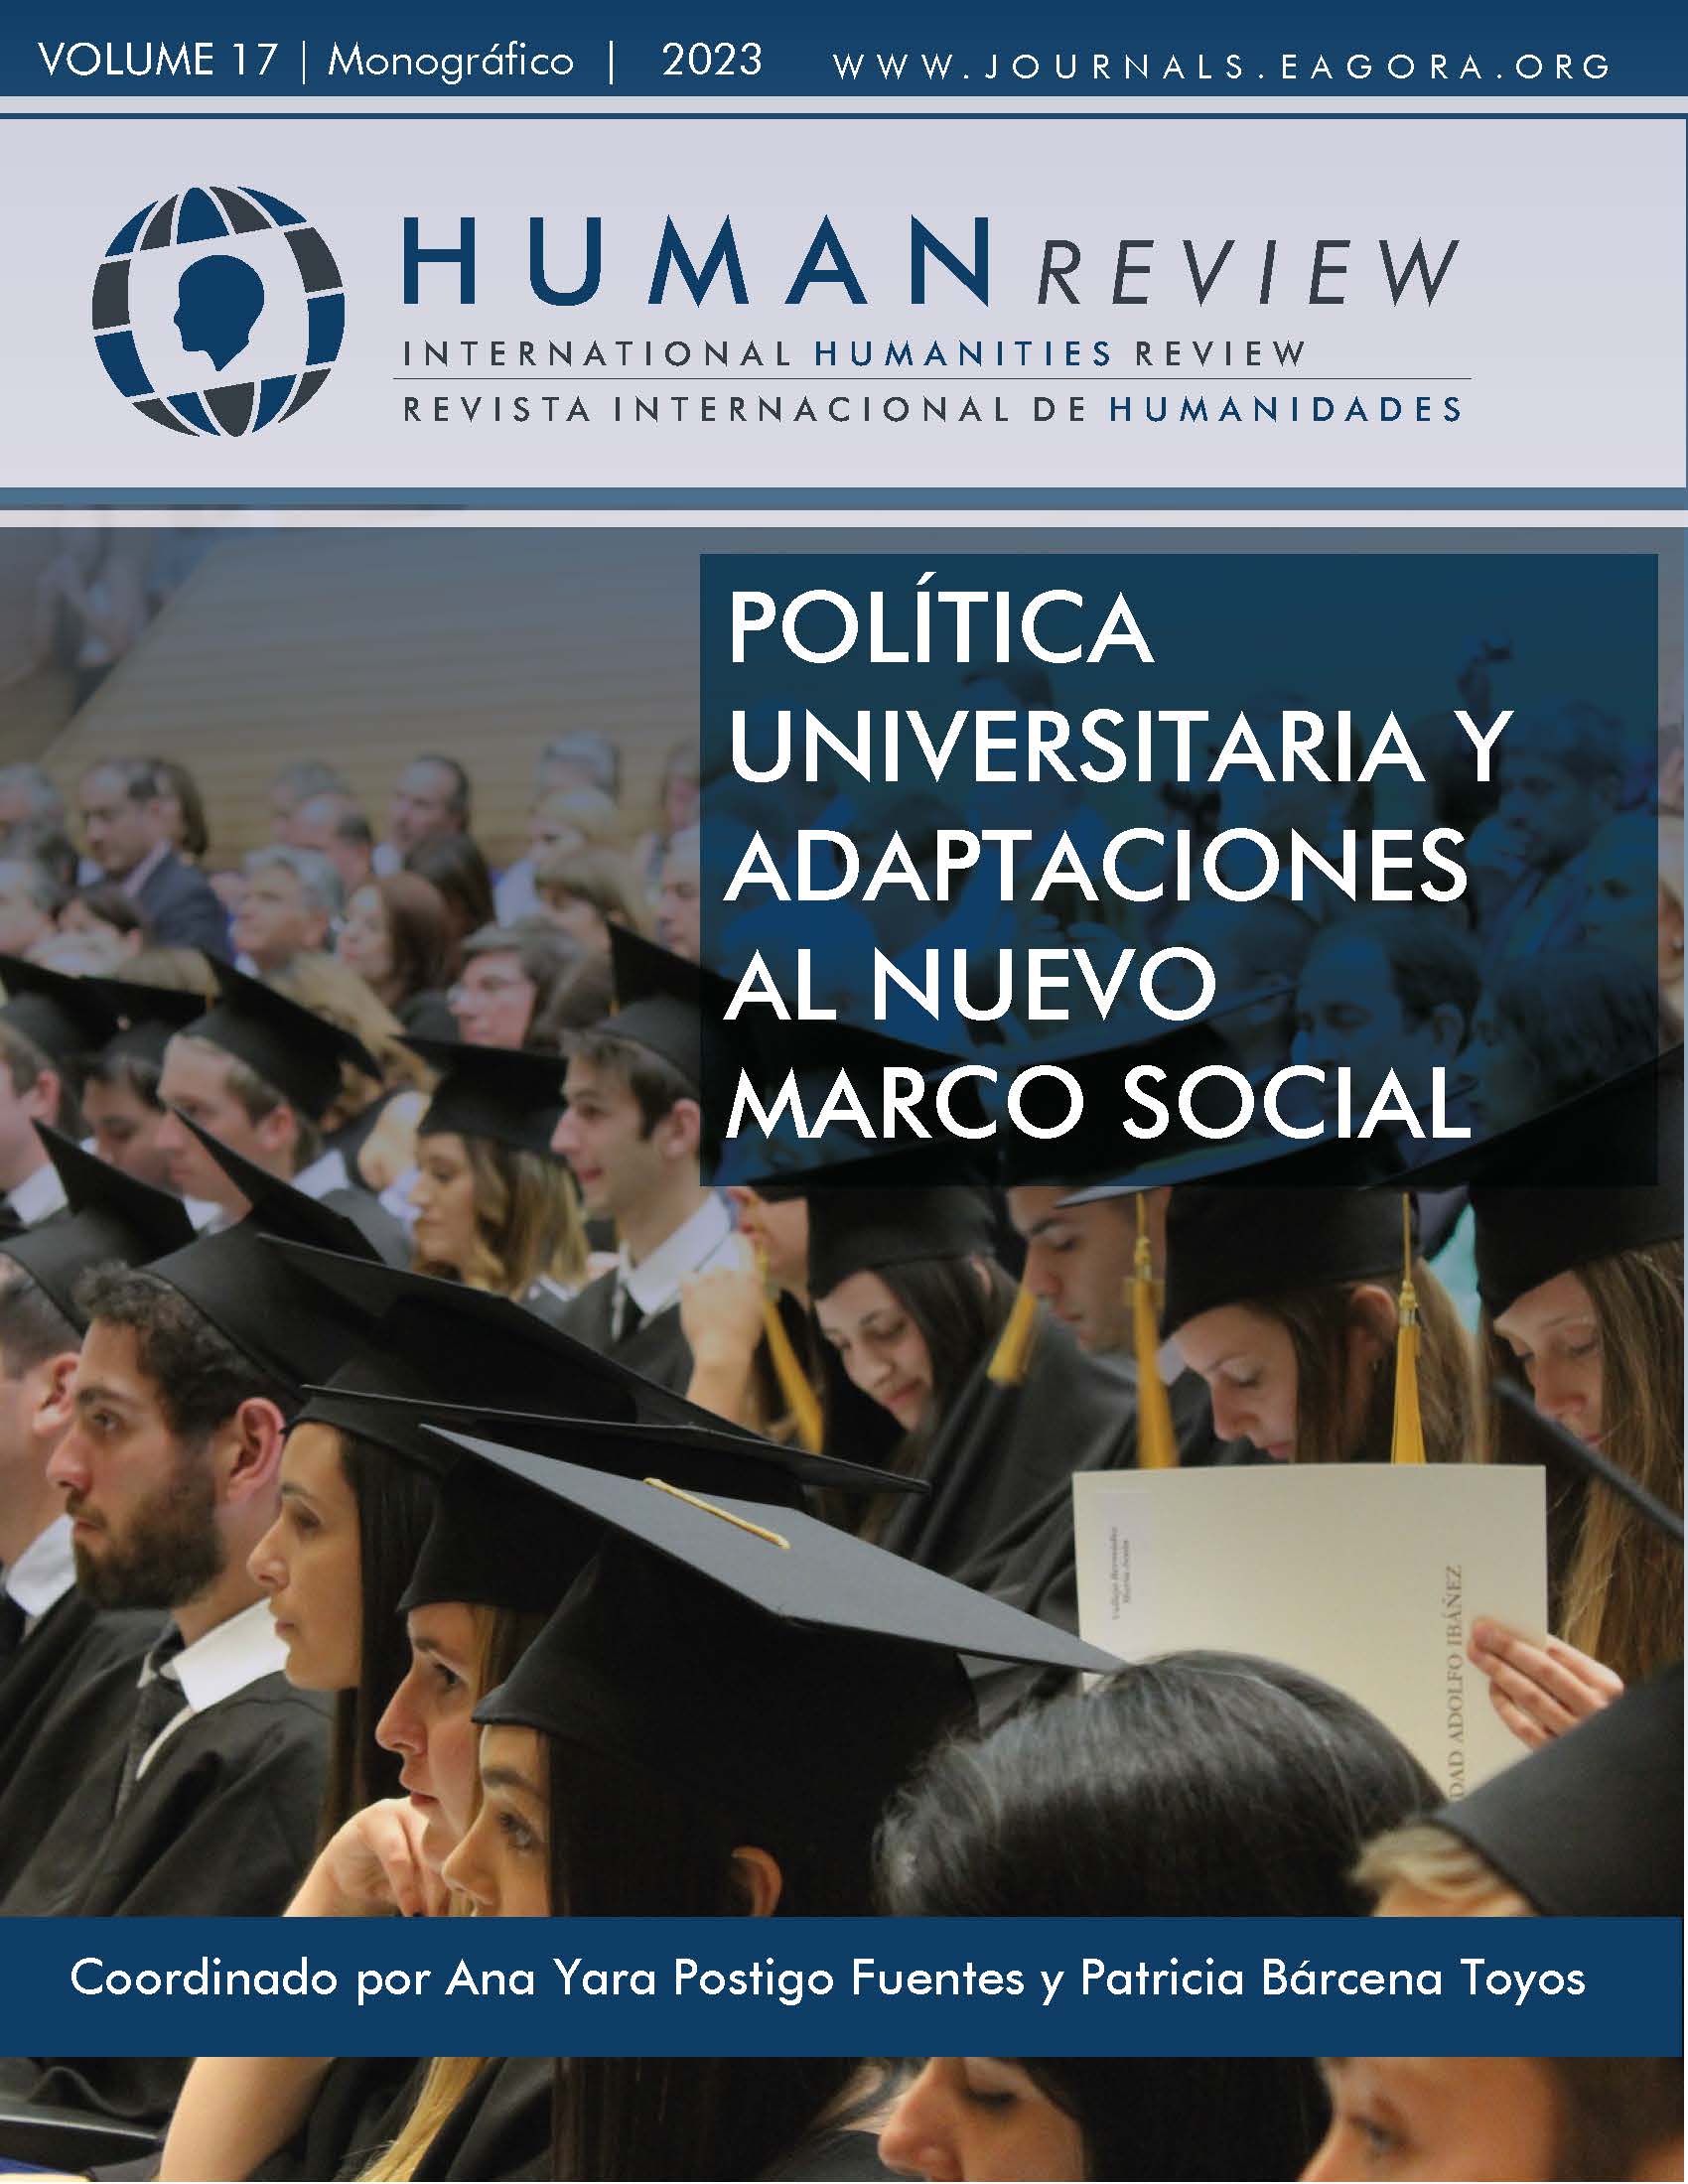 					View Vol. 17 No. 2 (2023): Monograph: "University policy and adaptations to the new social framework"
				